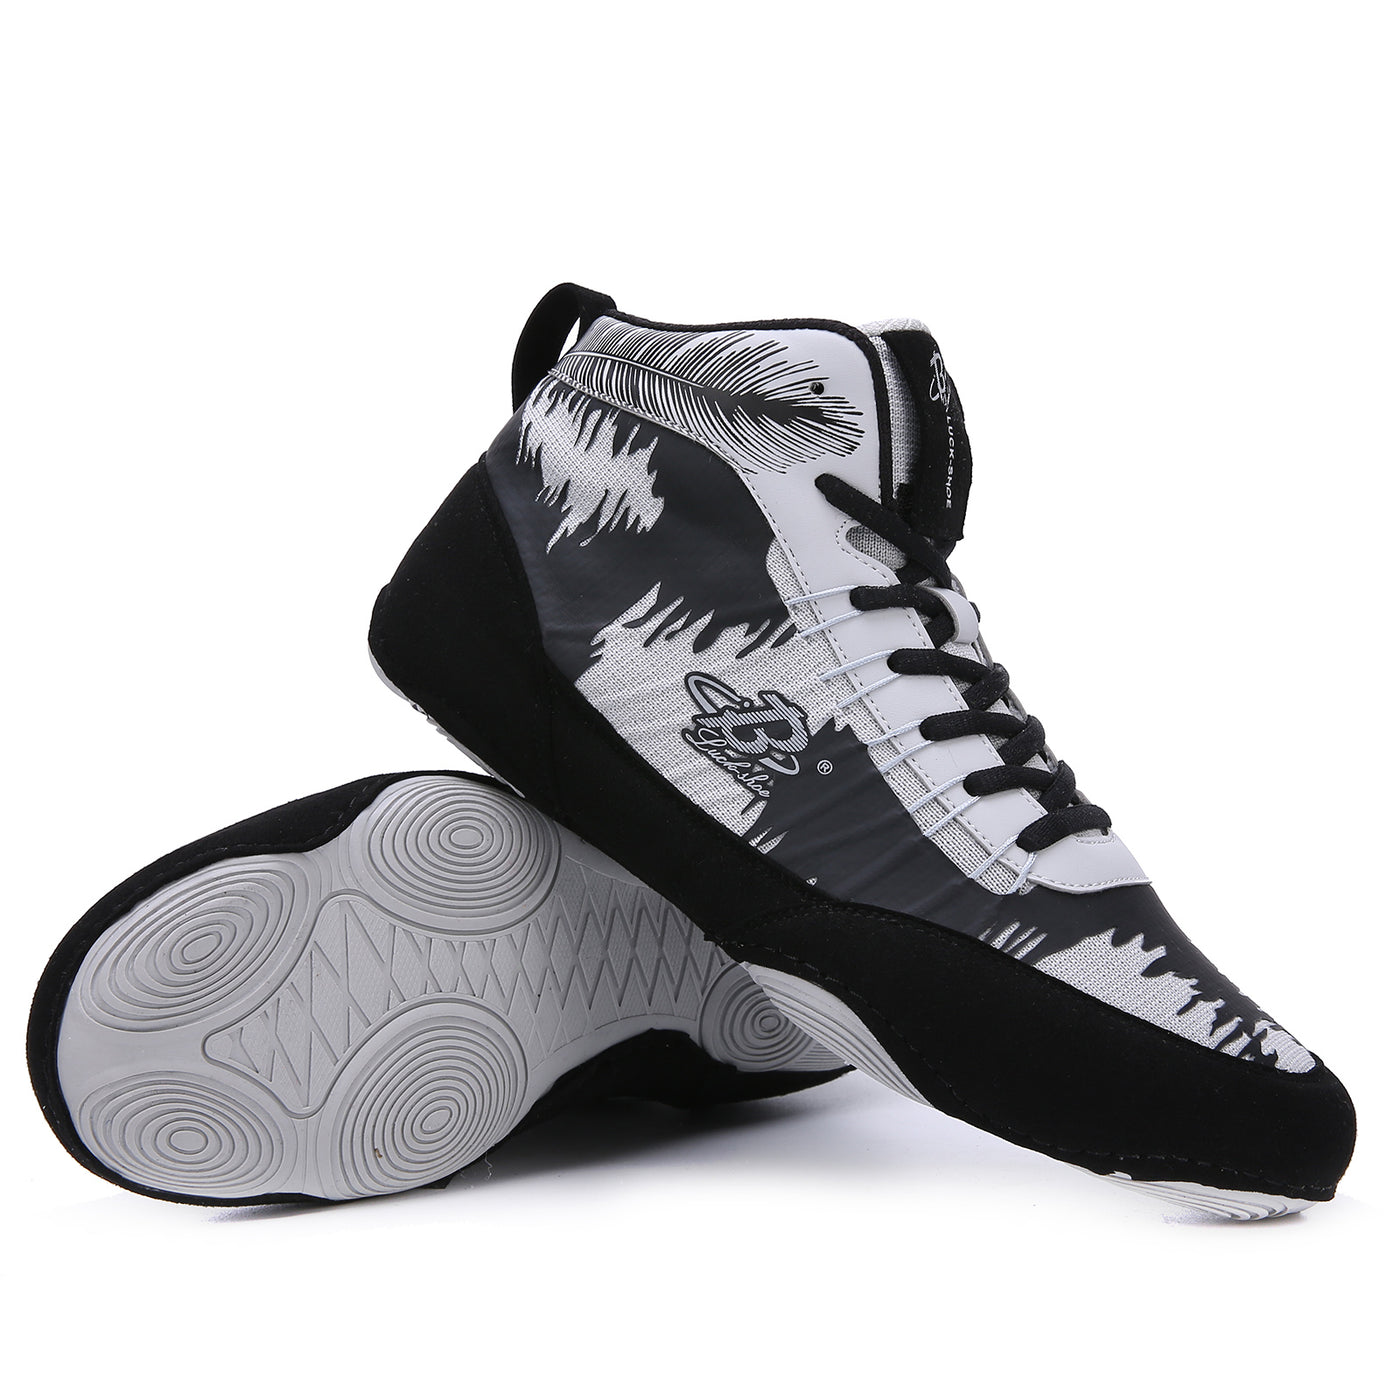 B LUCK SHOE Wrestling Shoes, Unisex Wrestling Boxing Shoes Breathable Weightlifting Shoe for Youth and Adult ls-178